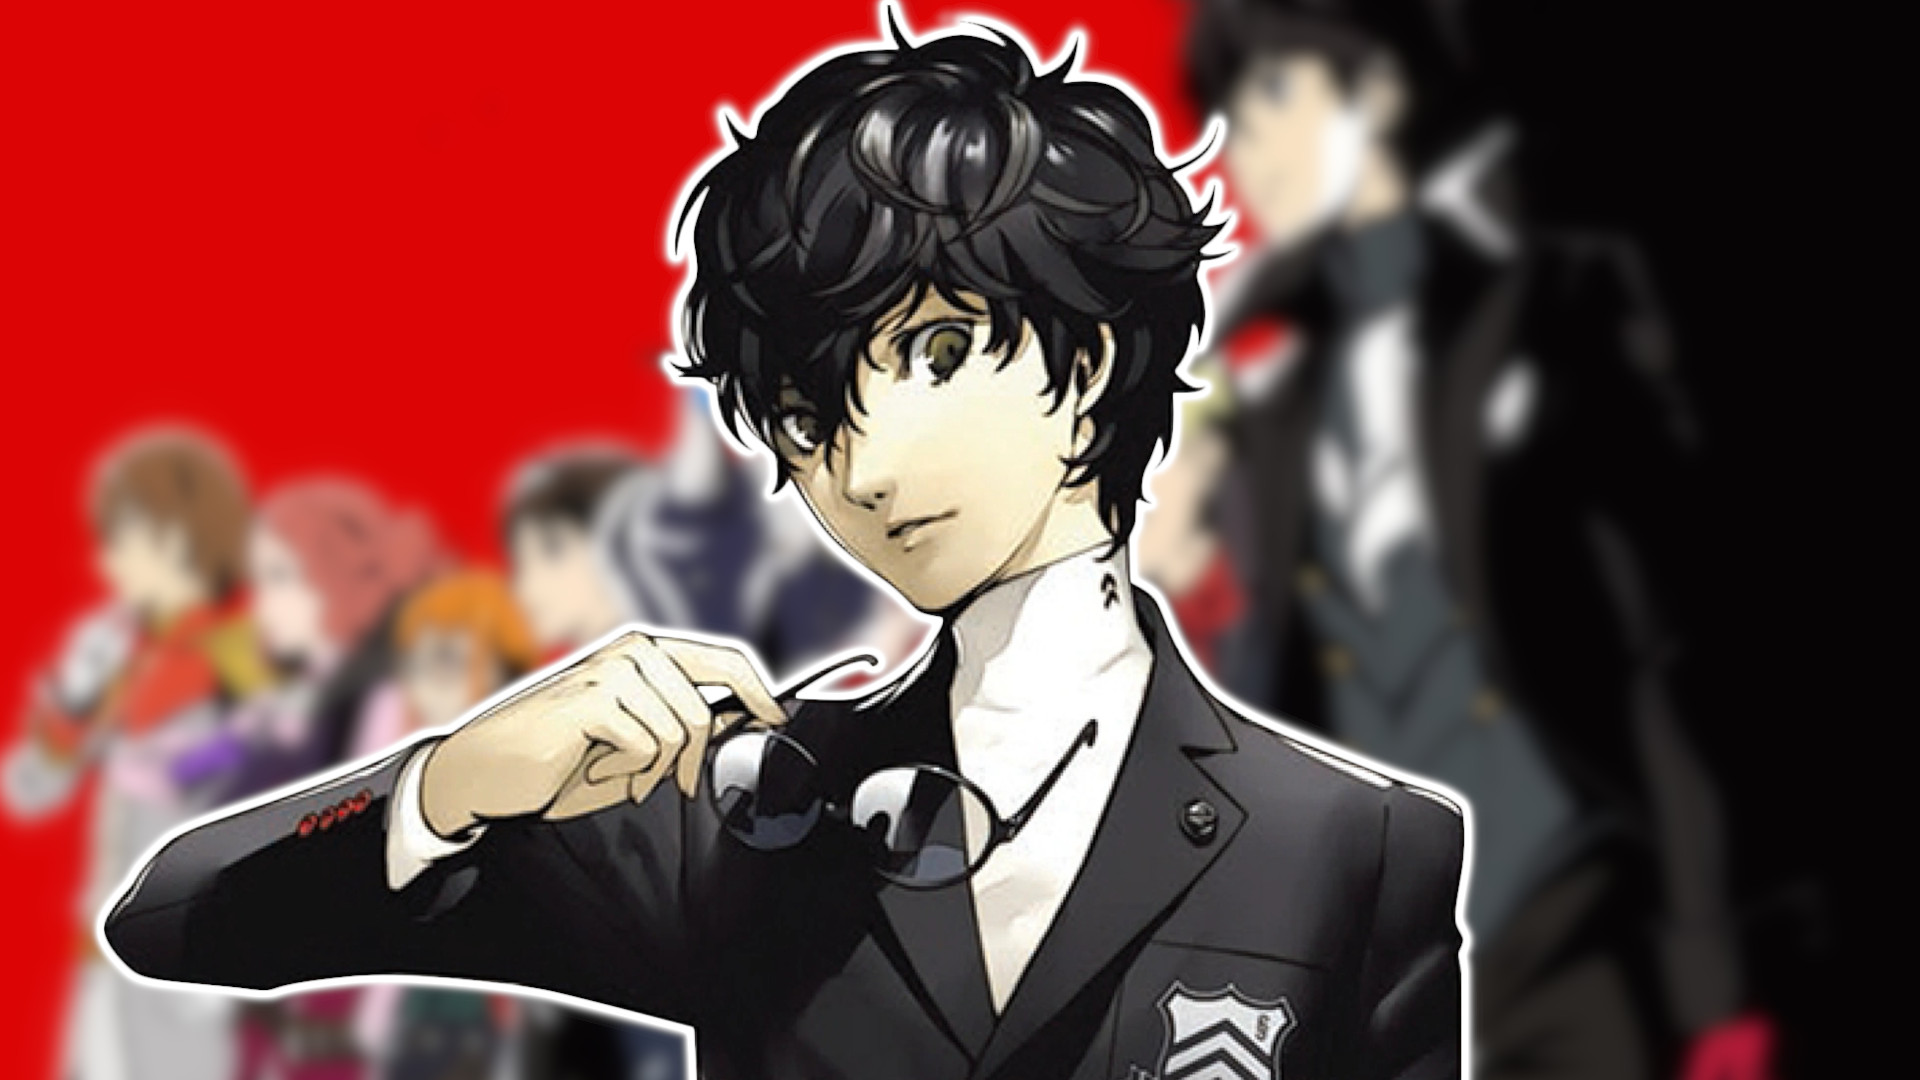 Persona 5 the Animation to be Streamed on Crunchyroll and Hulu